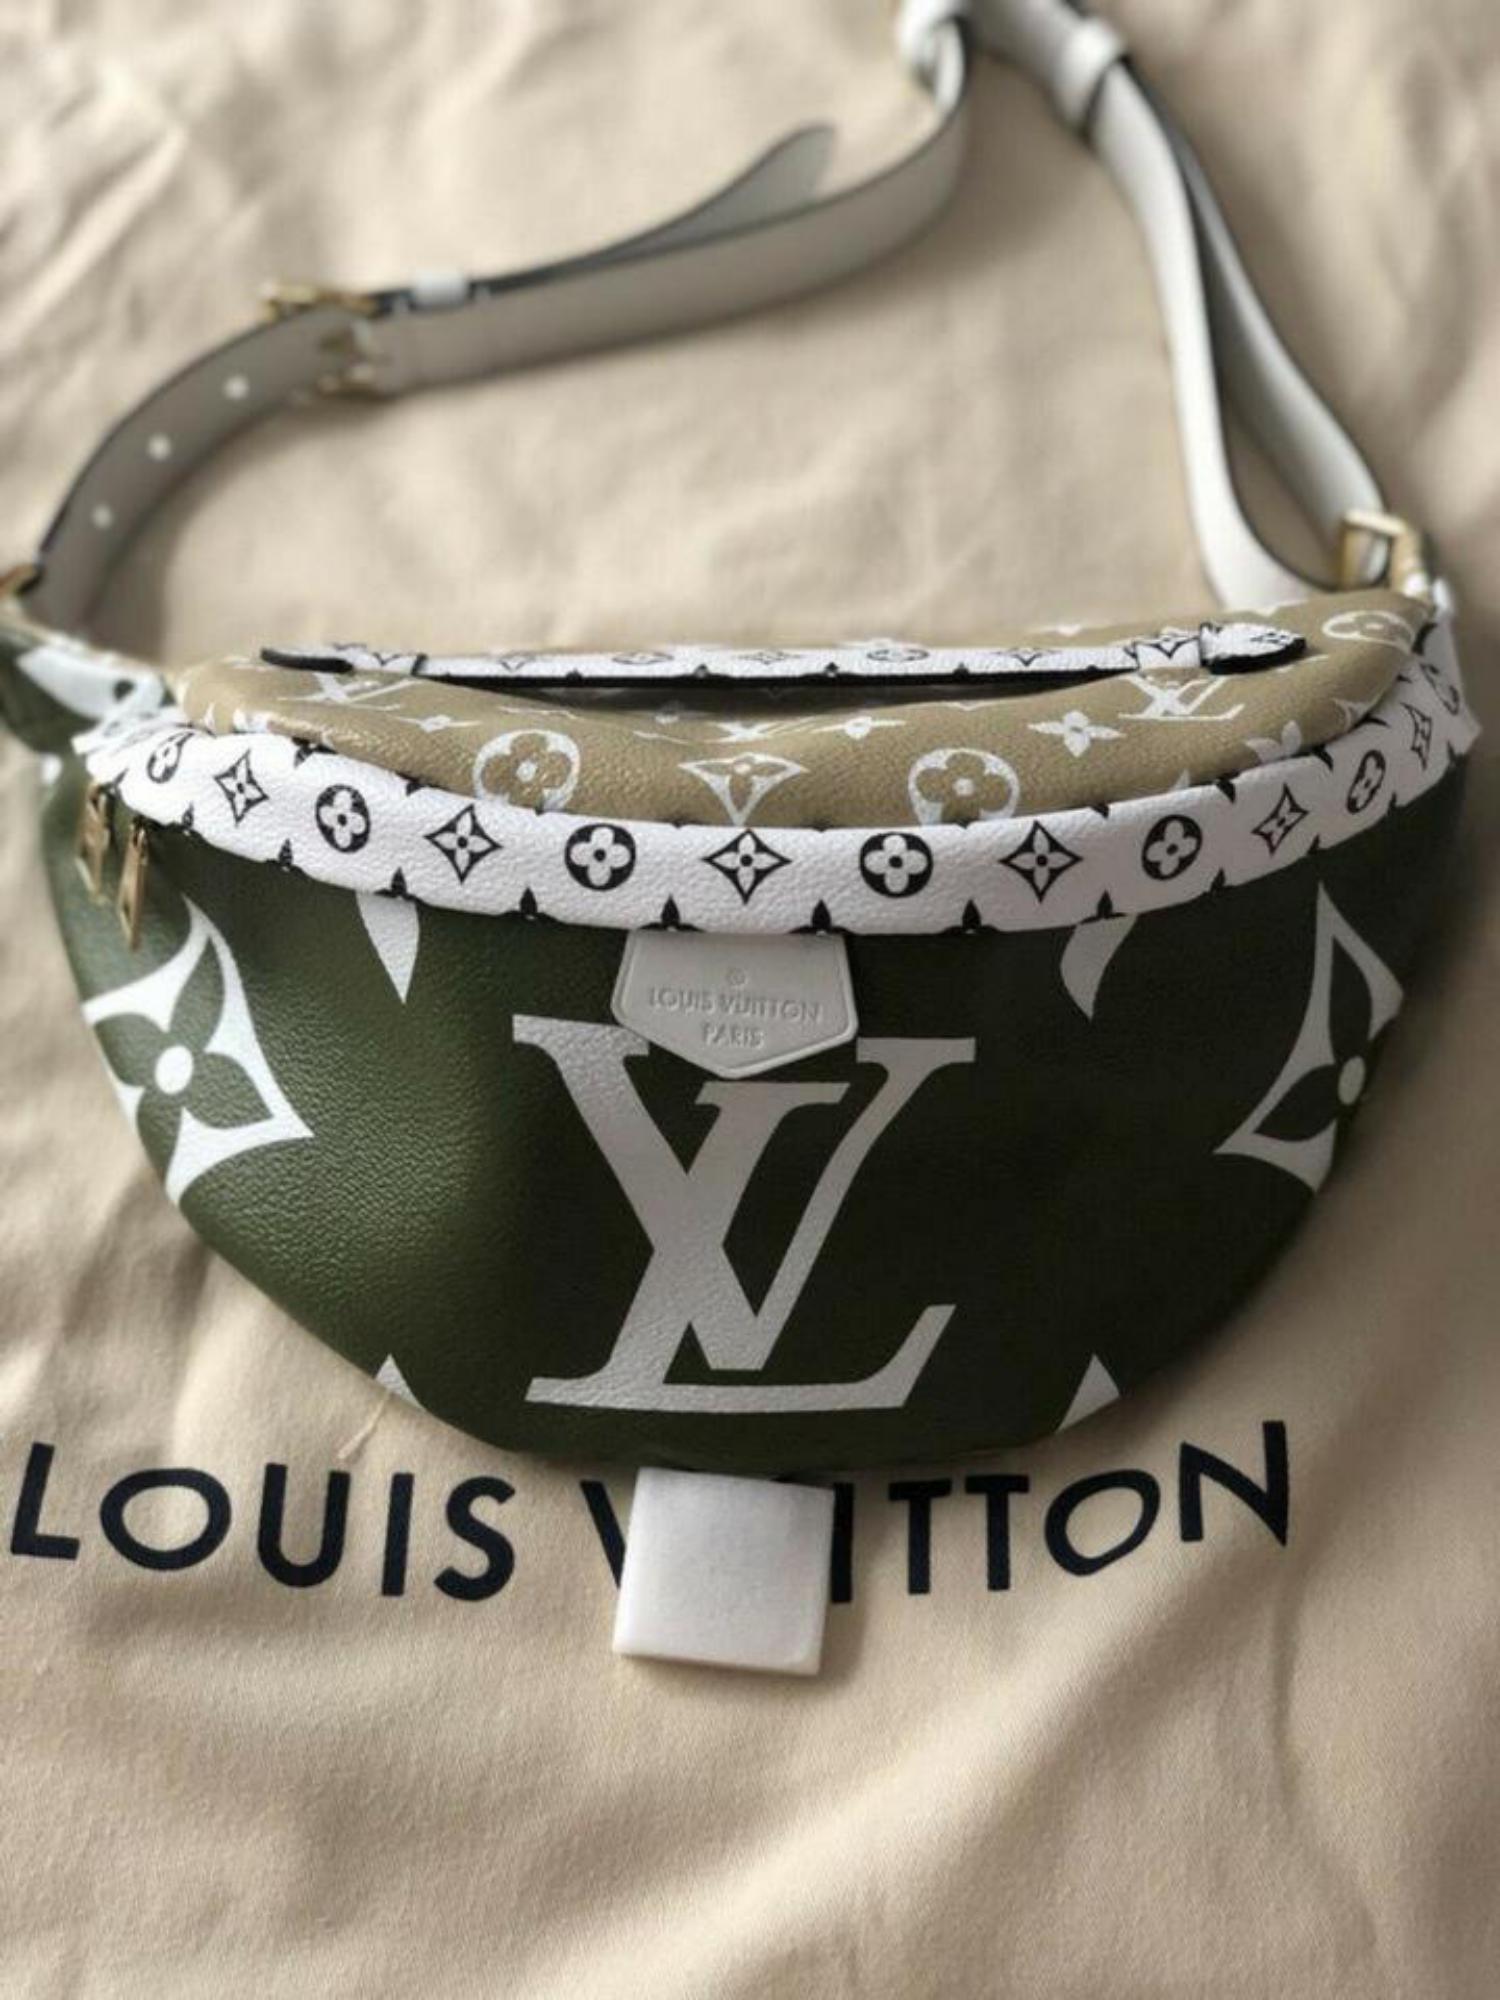 Women's Louis Vuitton Bumbag Giant Limited Fanny Pack Waist Pouch 870621 Cross Body Bag For Sale